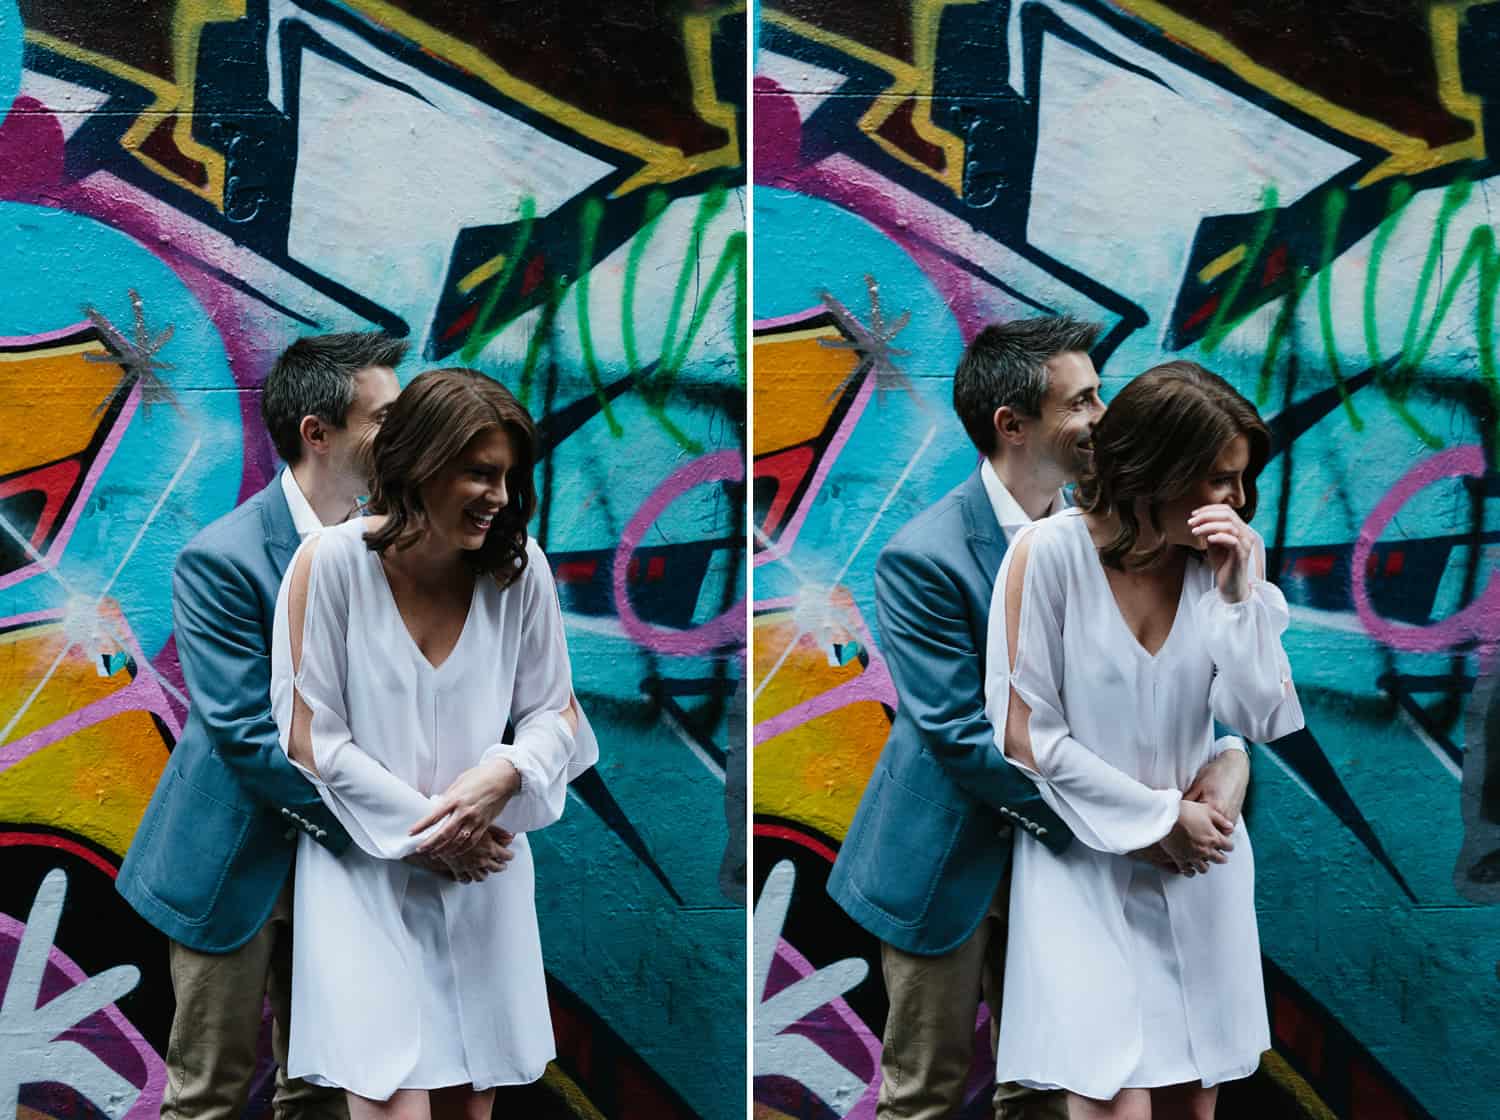 Engagement Photographer Melbourne Graffiti Walk Hosier Lane and Hardware Lane Engagement Shoot with Quila and Dave